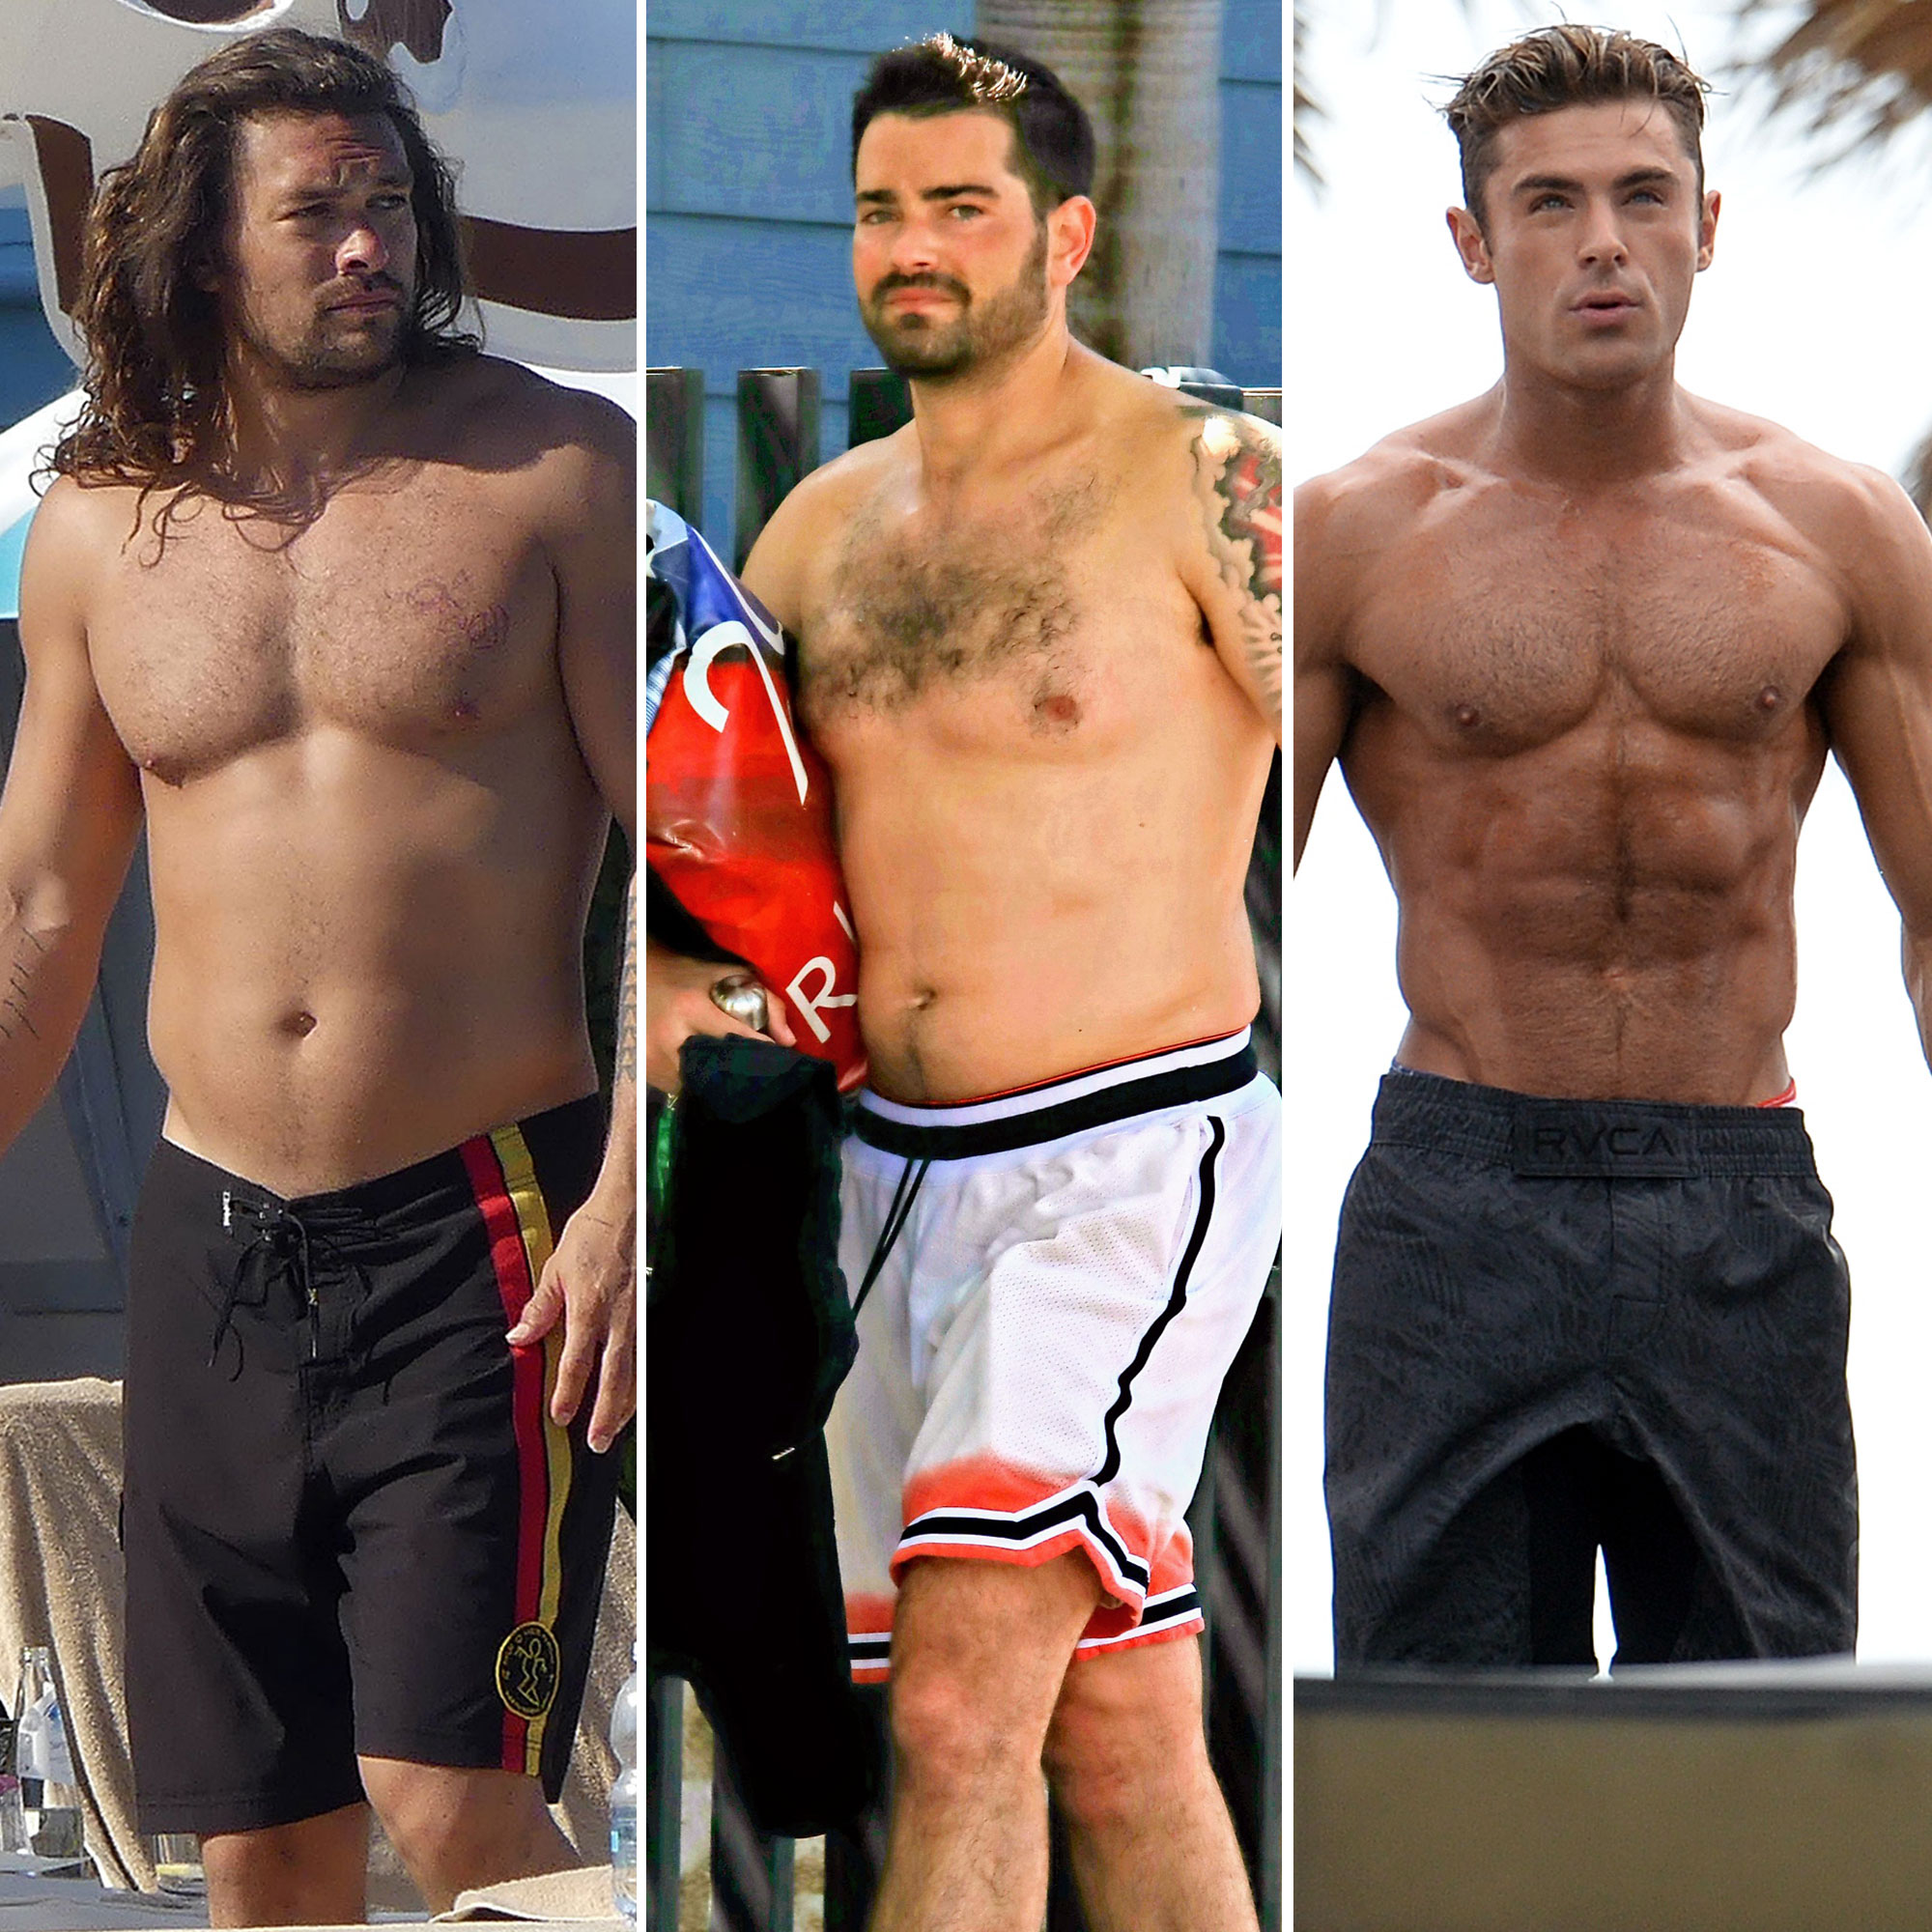 Hollywoods Hottest Hunks Go Shirtless, Show Off Physiques Pics pic photo